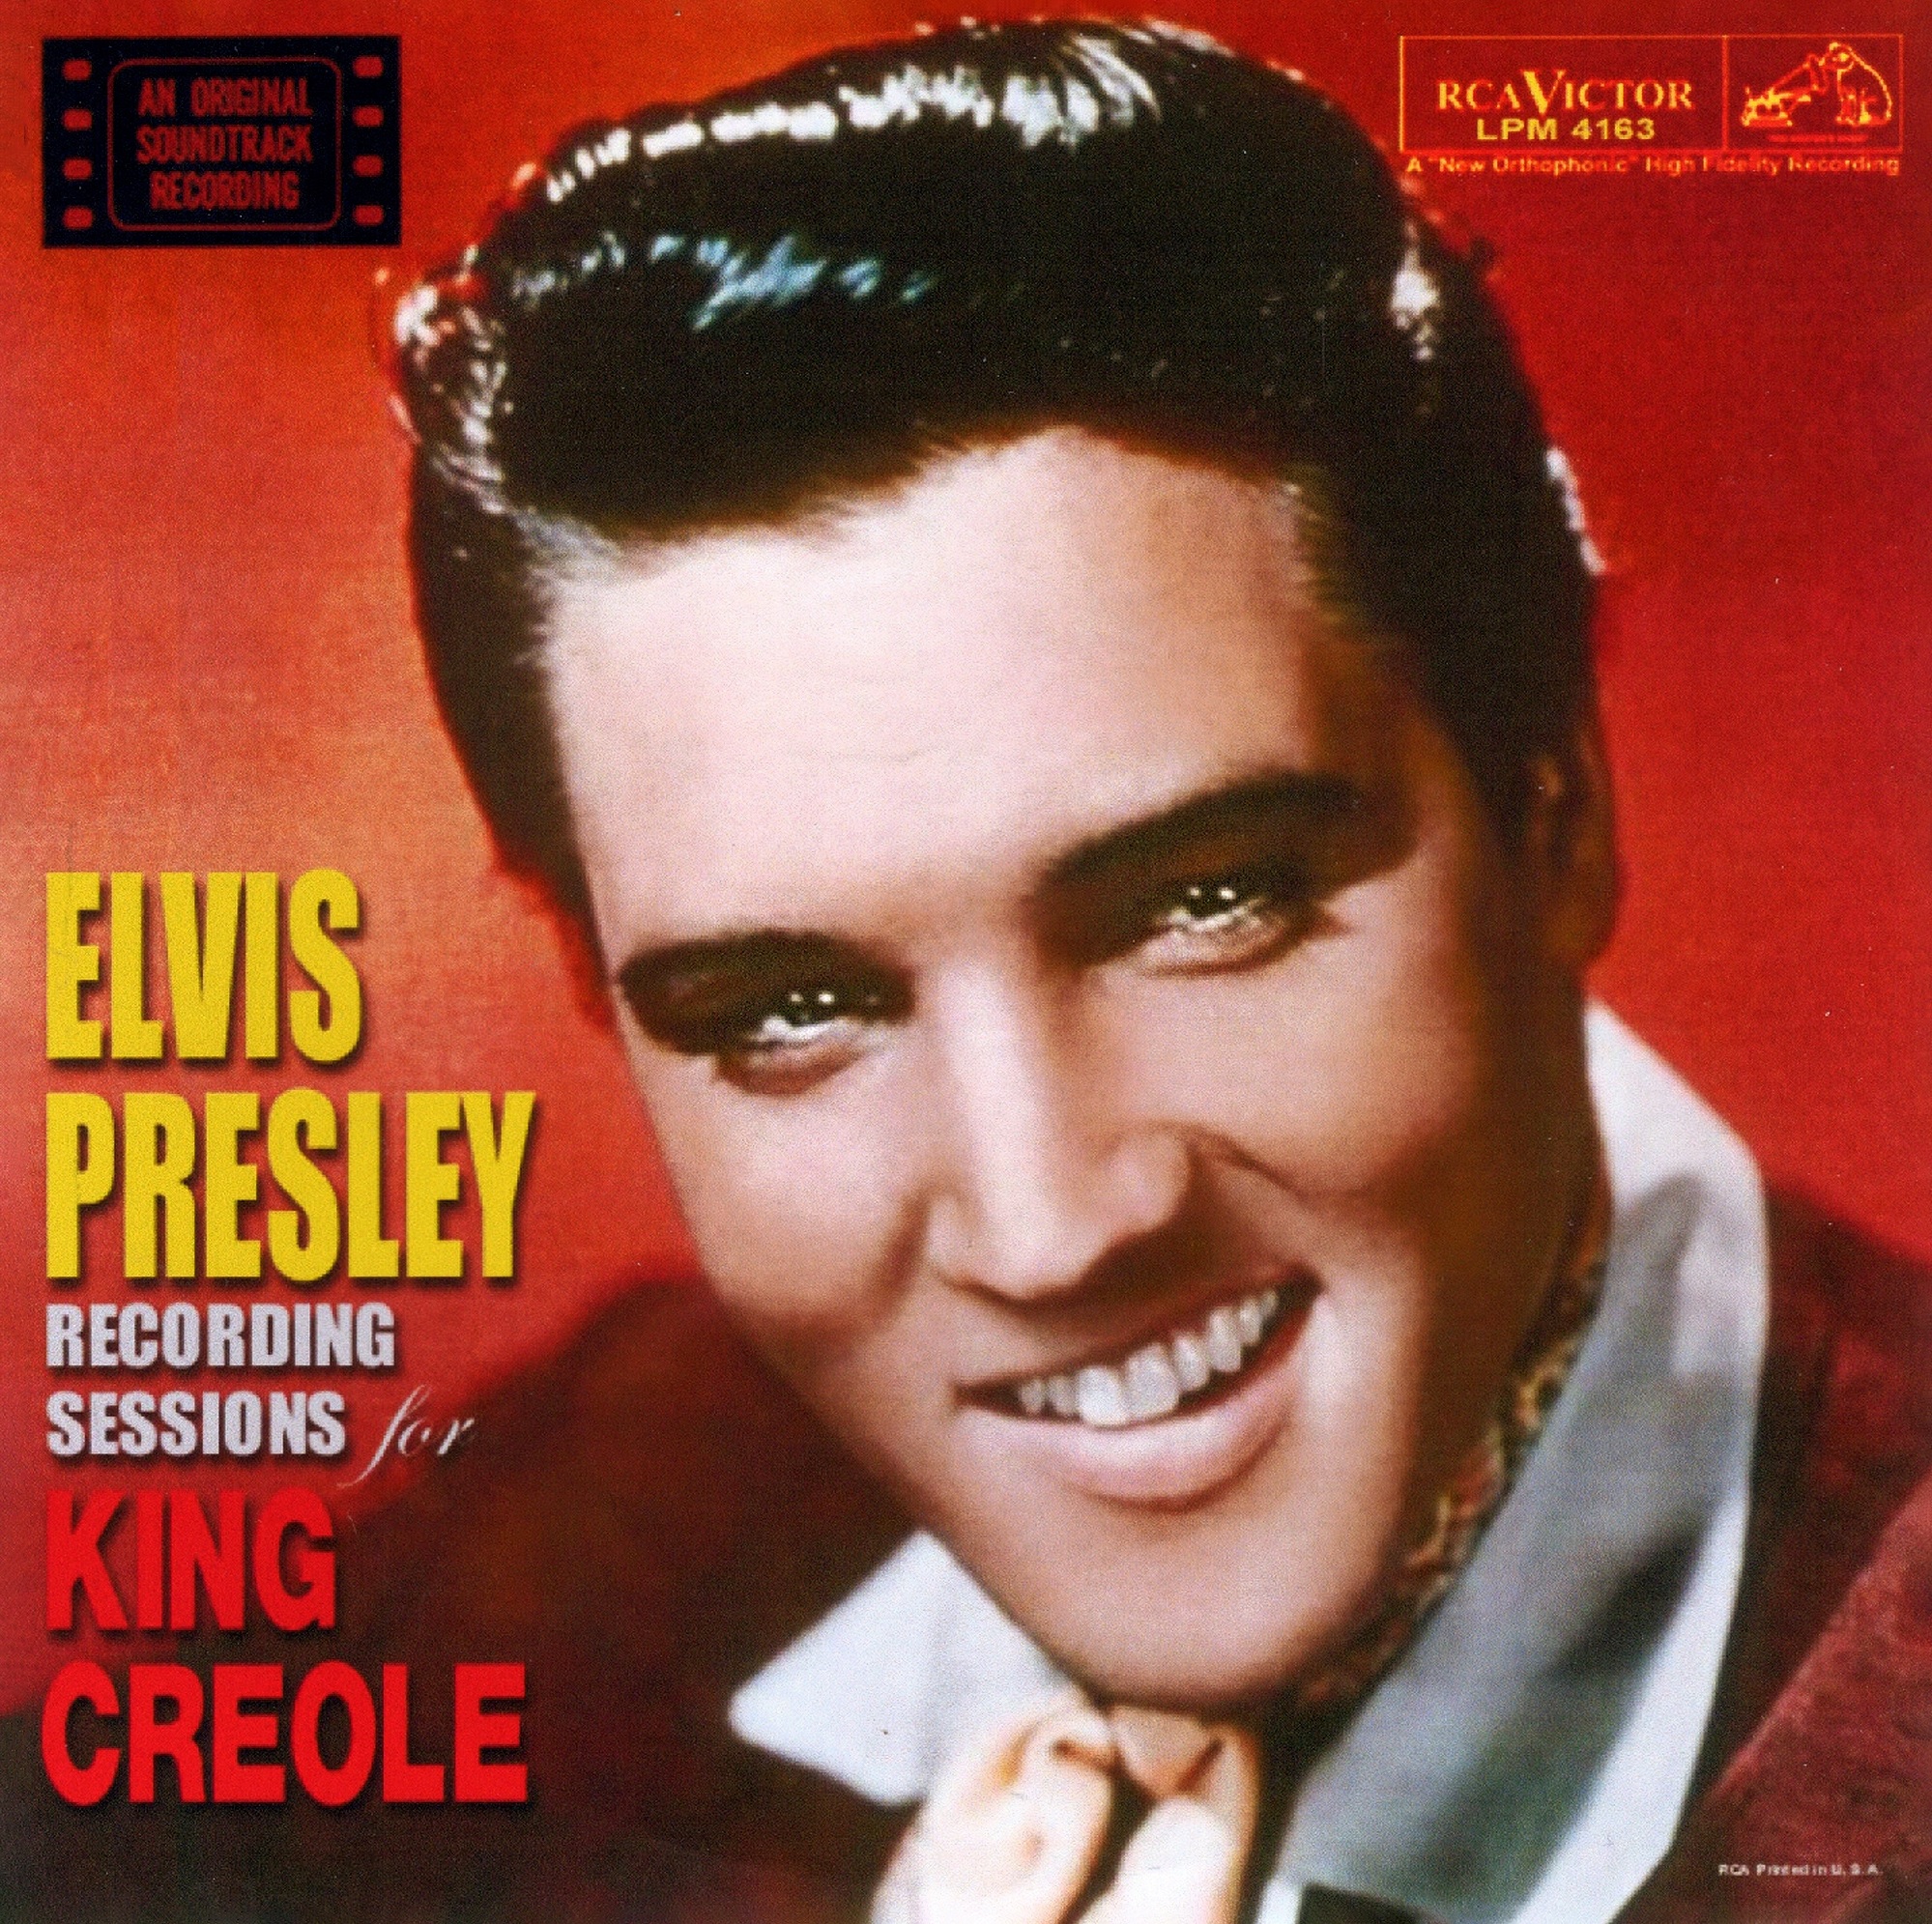 Elvis Presley - Recording Sessions For King Creole [CMT Star LPM4163]